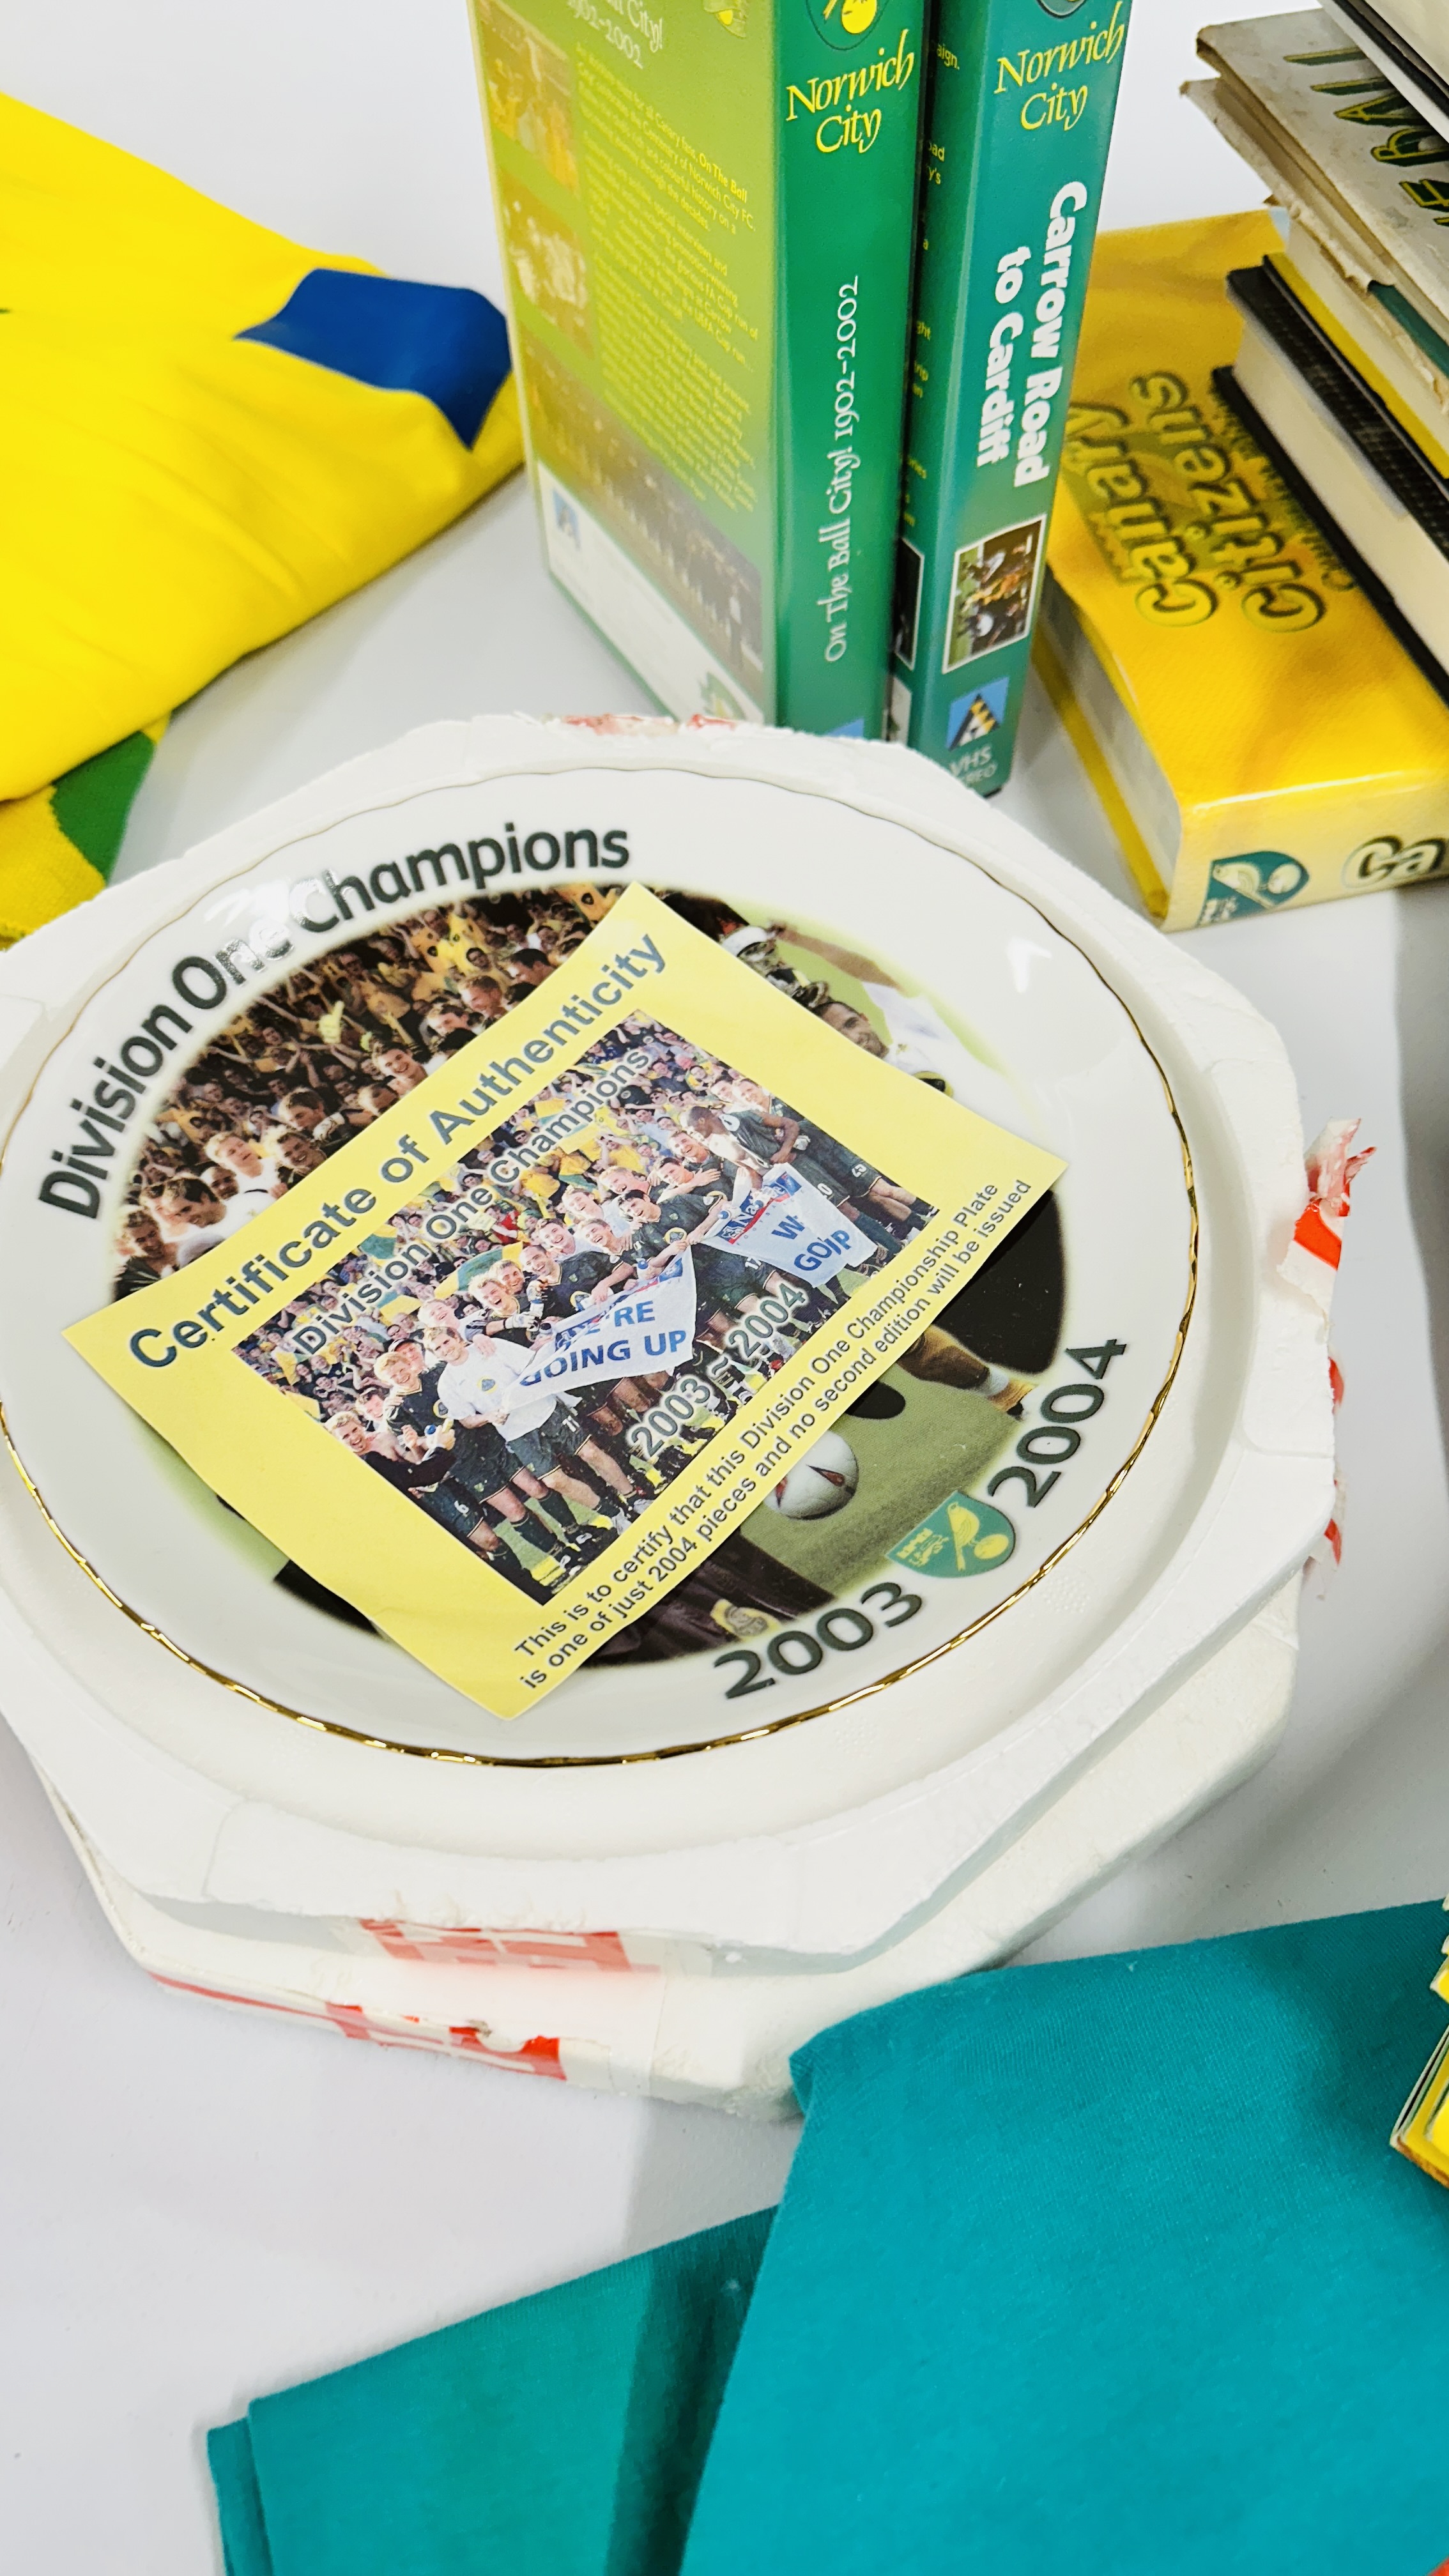 BOX CONTAINING A COLLECTION OF NORWICH CITY FOOTBALL CLUB MEMORABILIA TO INCLUDE PROGRAMMES FROM - Image 11 of 14